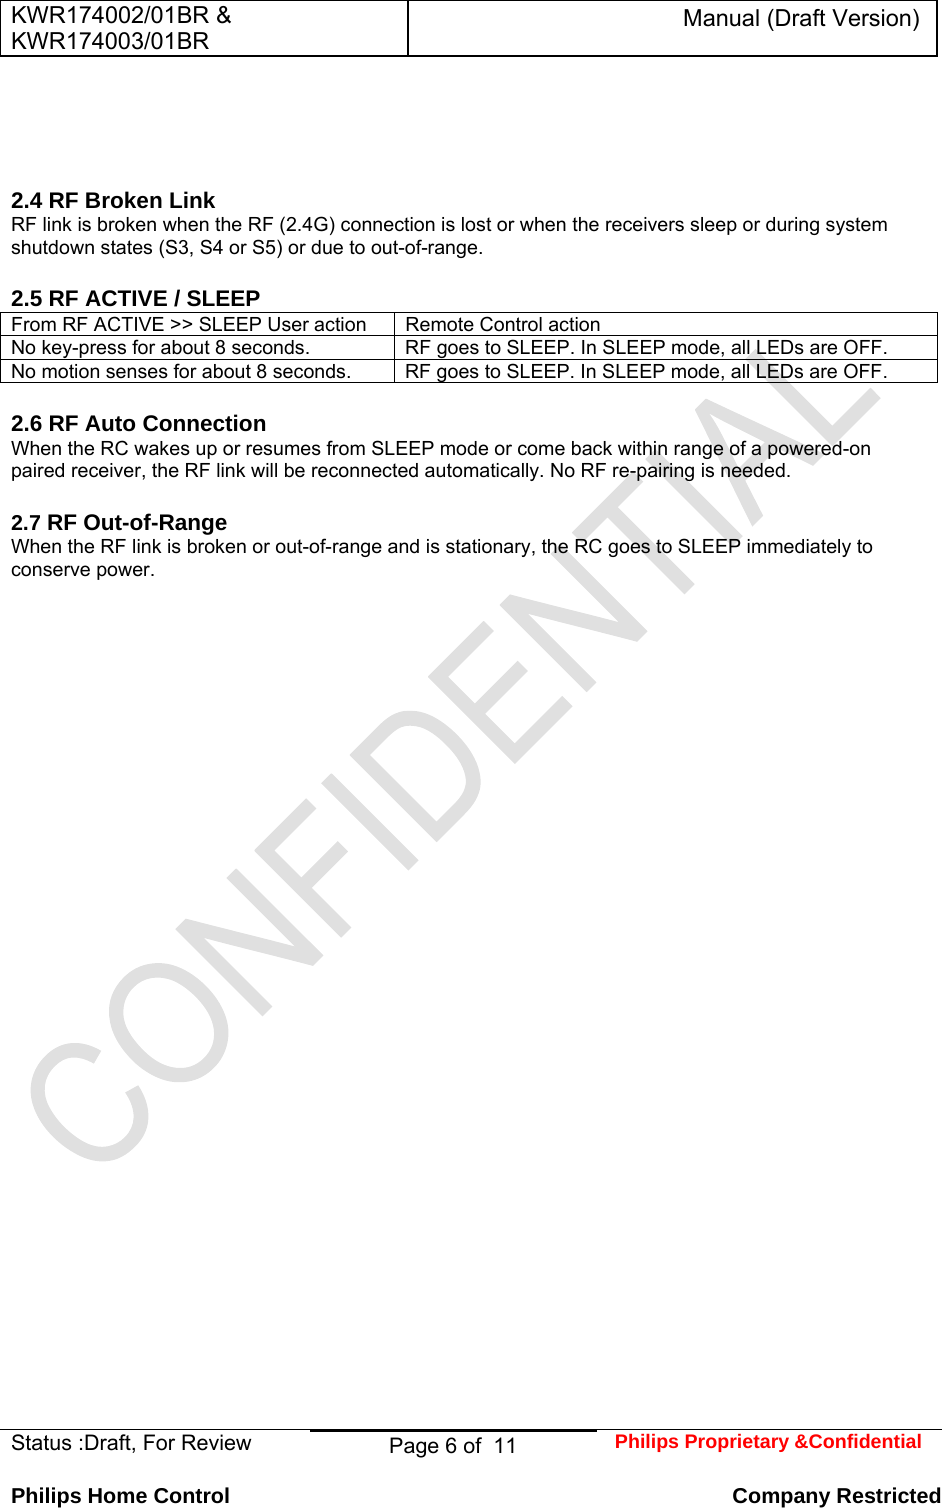 KWR174002/01BR &amp; KWR174003/01BR Manual (Draft Version)  Status :Draft, For Review  Page 6 of  11  Philips Proprietary &amp;Confidential  Philips Home Control   Company Restricted     2.4 RF Broken Link  RF link is broken when the RF (2.4G) connection is lost or when the receivers sleep or during system shutdown states (S3, S4 or S5) or due to out-of-range.   2.5 RF ACTIVE / SLEEP  From RF ACTIVE &gt;&gt; SLEEP User action   Remote Control action  No key-press for about 8 seconds.   RF goes to SLEEP. In SLEEP mode, all LEDs are OFF.  No motion senses for about 8 seconds.   RF goes to SLEEP. In SLEEP mode, all LEDs are OFF.   2.6 RF Auto Connection  When the RC wakes up or resumes from SLEEP mode or come back within range of a powered-on paired receiver, the RF link will be reconnected automatically. No RF re-pairing is needed.  2.7 RF Out-of-Range  When the RF link is broken or out-of-range and is stationary, the RC goes to SLEEP immediately to conserve power.                                